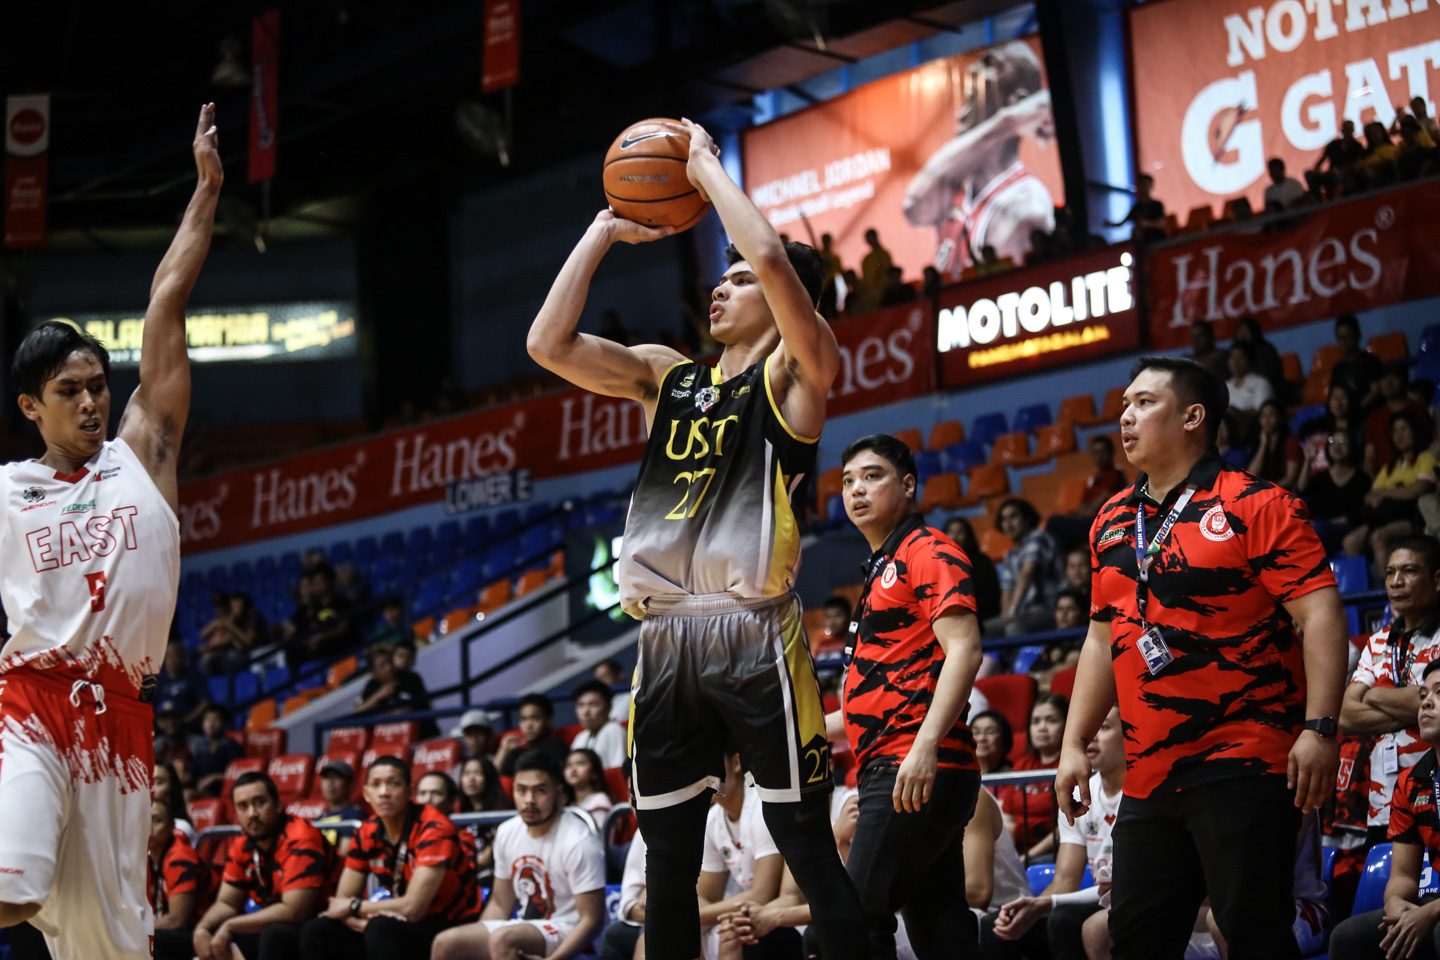 Rookie record: Triple-double party for birthday boy Cansino